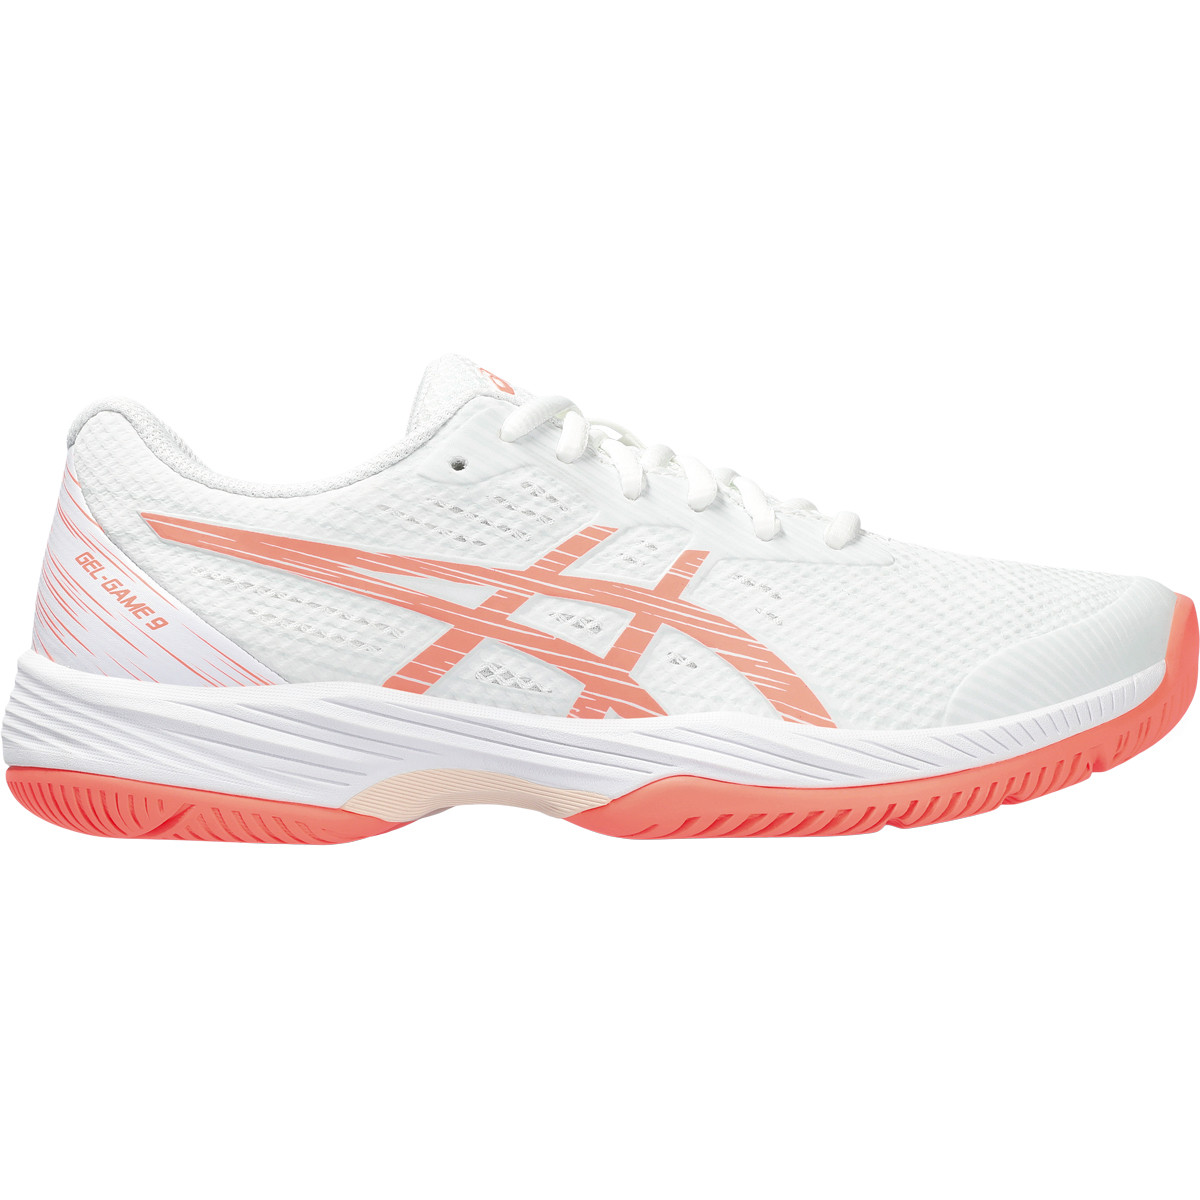 CHAUSSURES ASICS FEMME GEL-GAME 9 TOUTES SURFACES